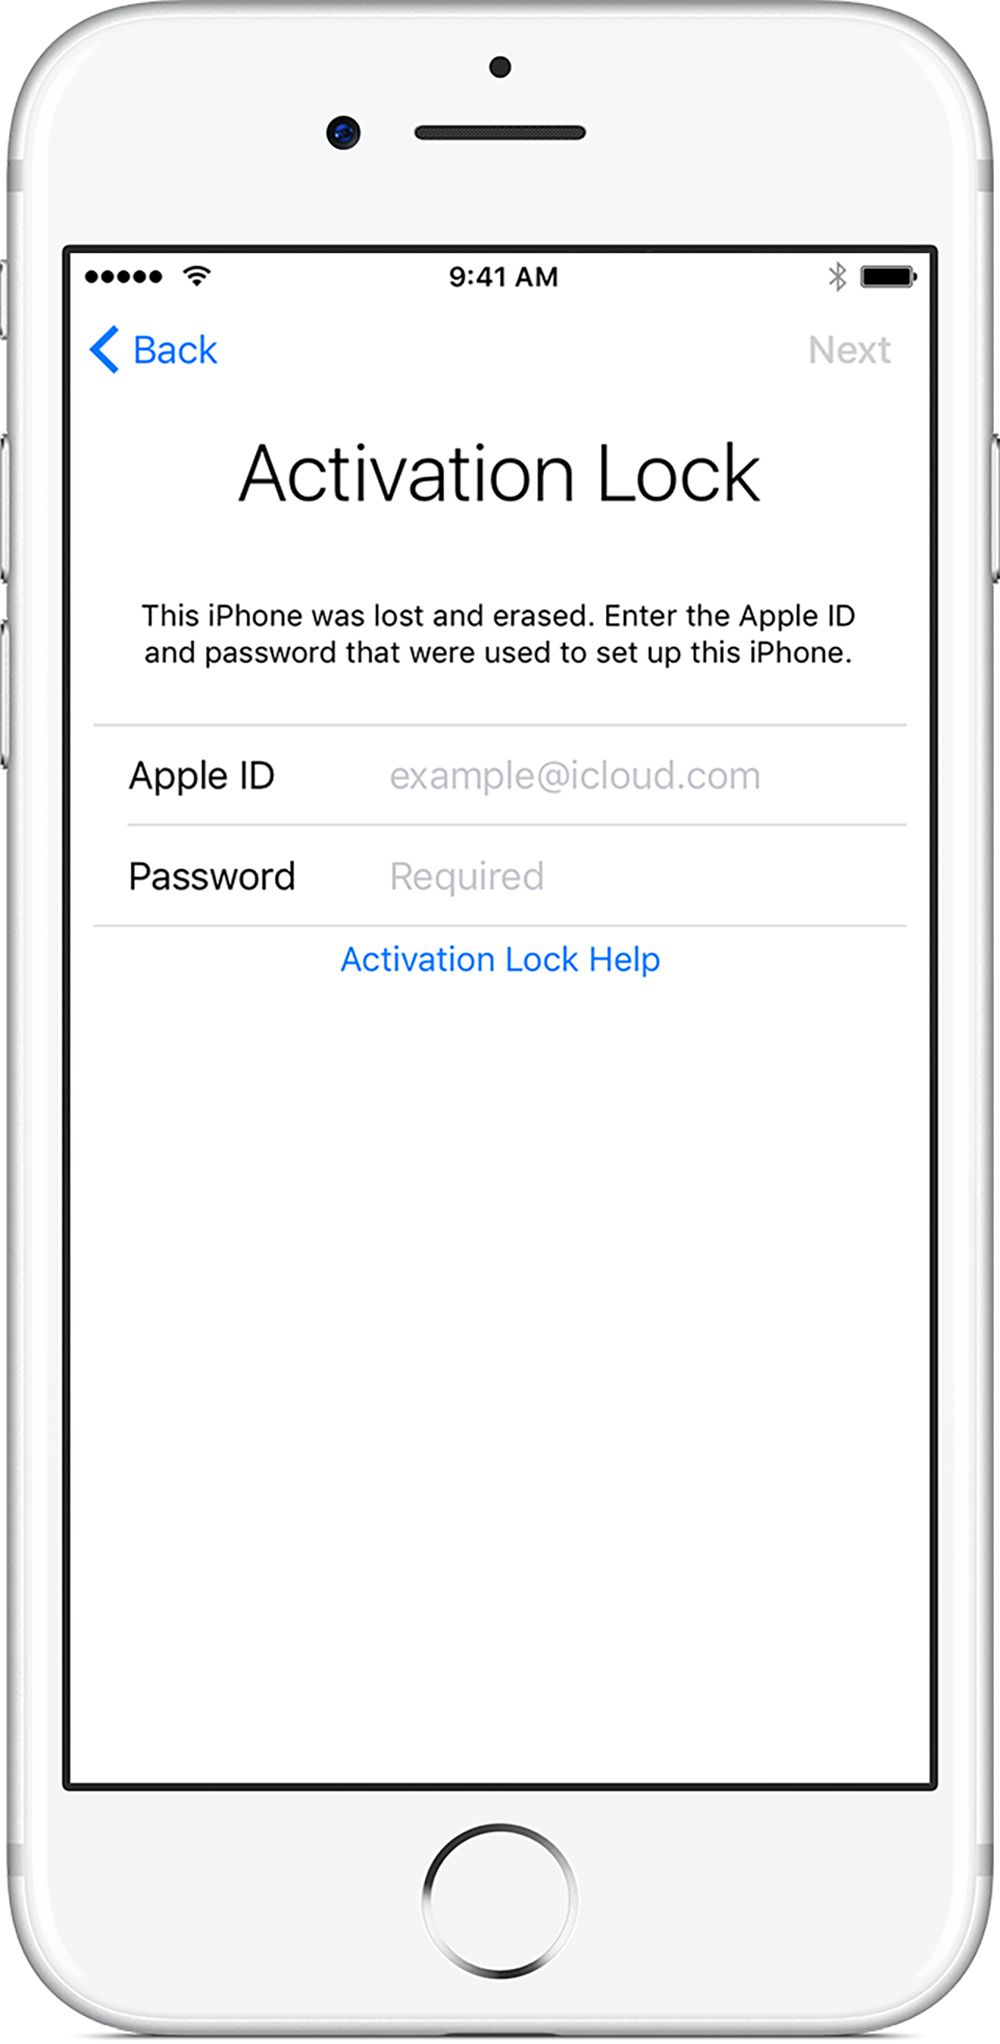 how to factory reset activation locked iphone